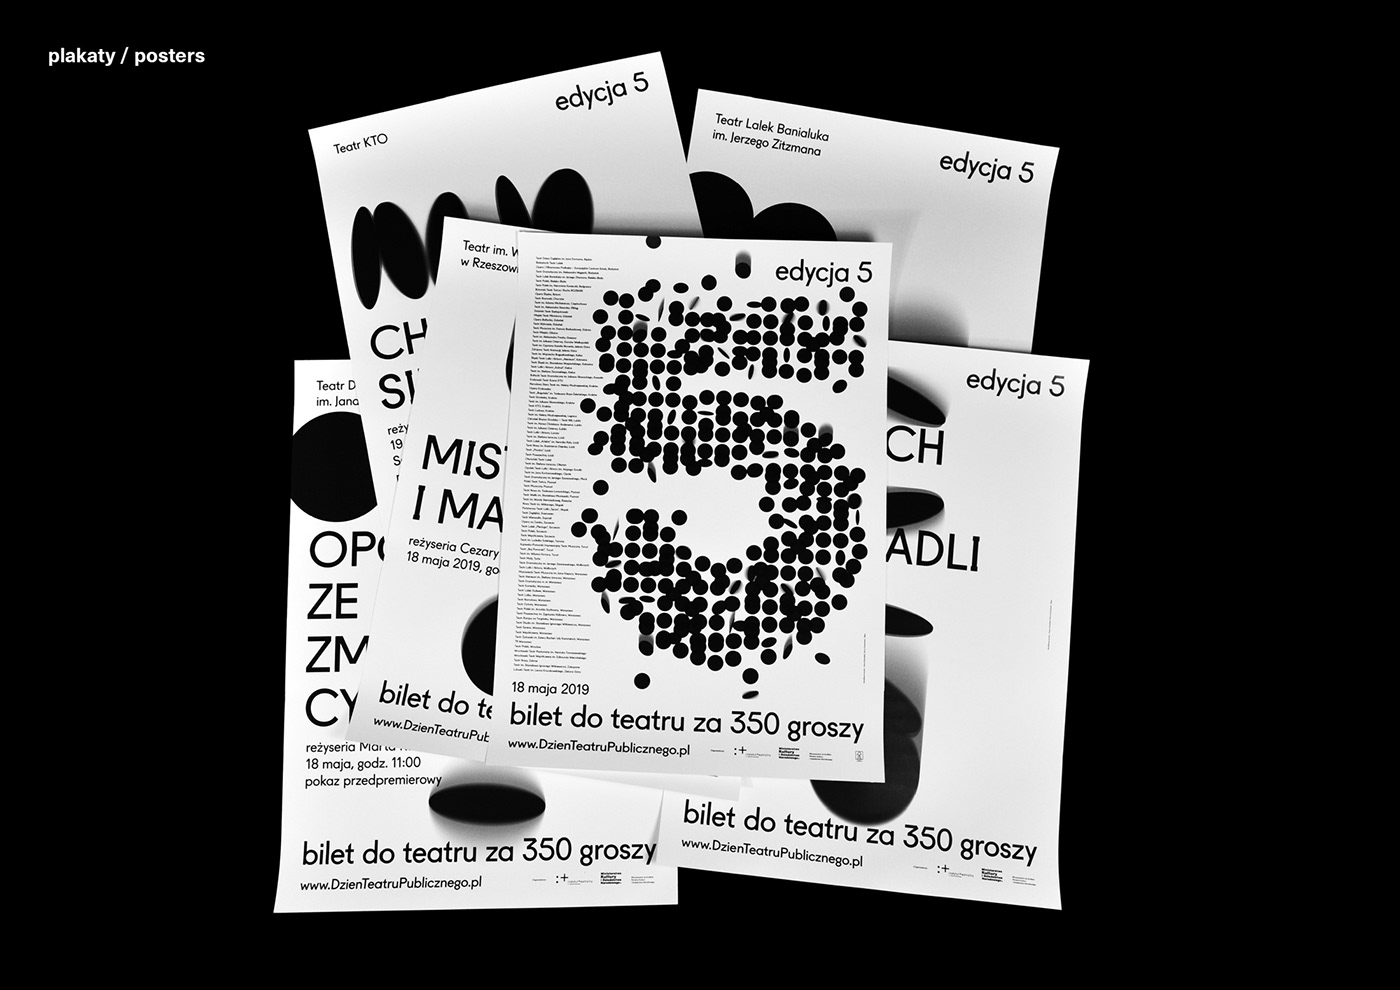 plakat poster teatr Theatre black and white dots plakaty posters tcket graphic design 